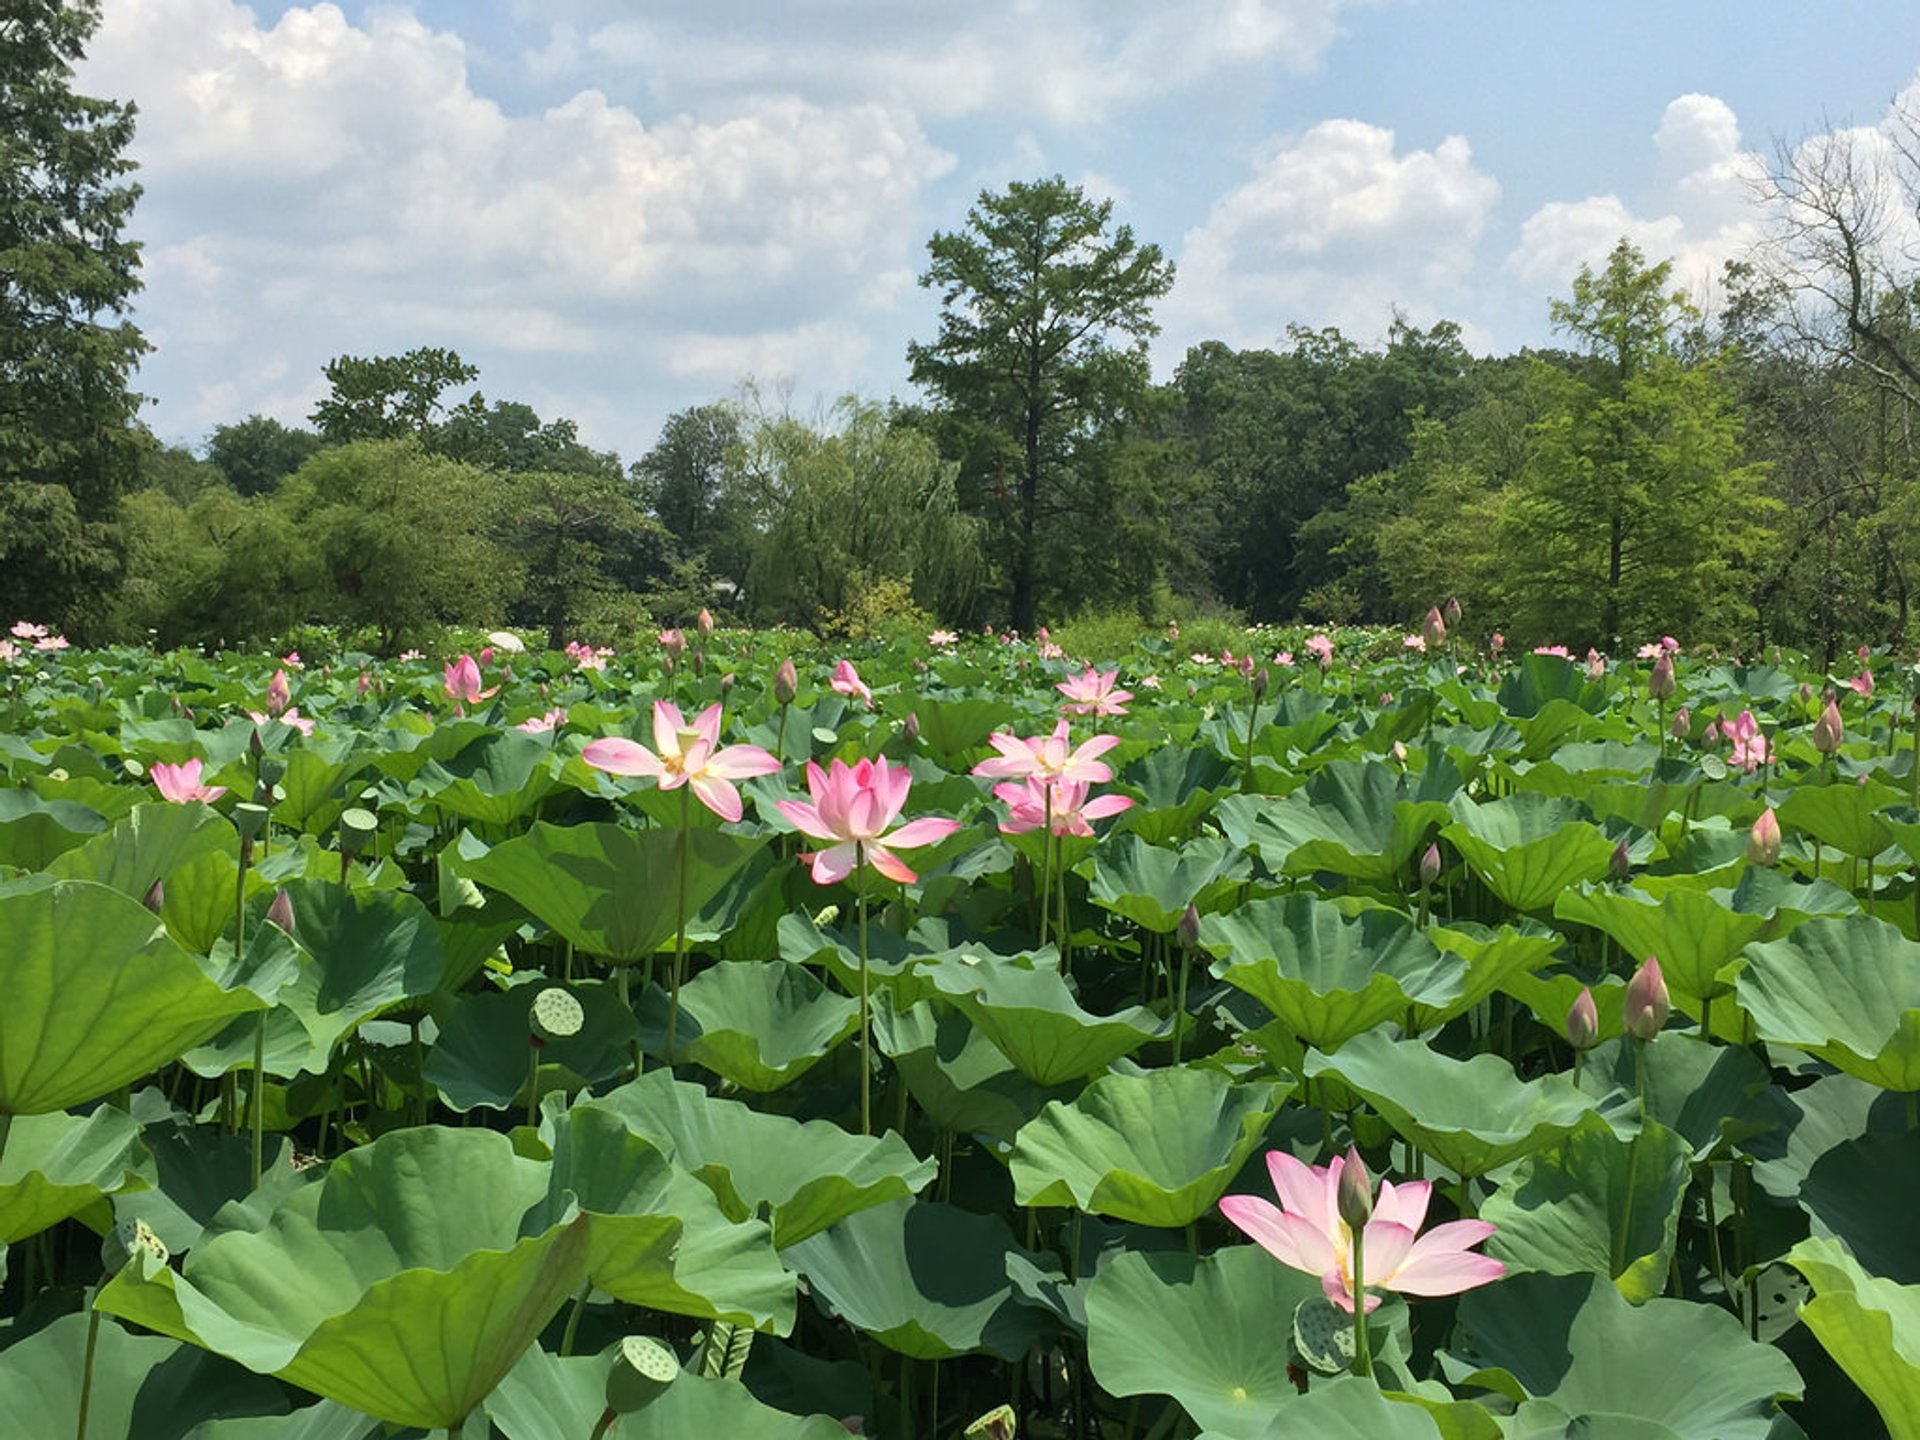 Lotus and Water Lilies at the Kenilworth Aquatic Garden